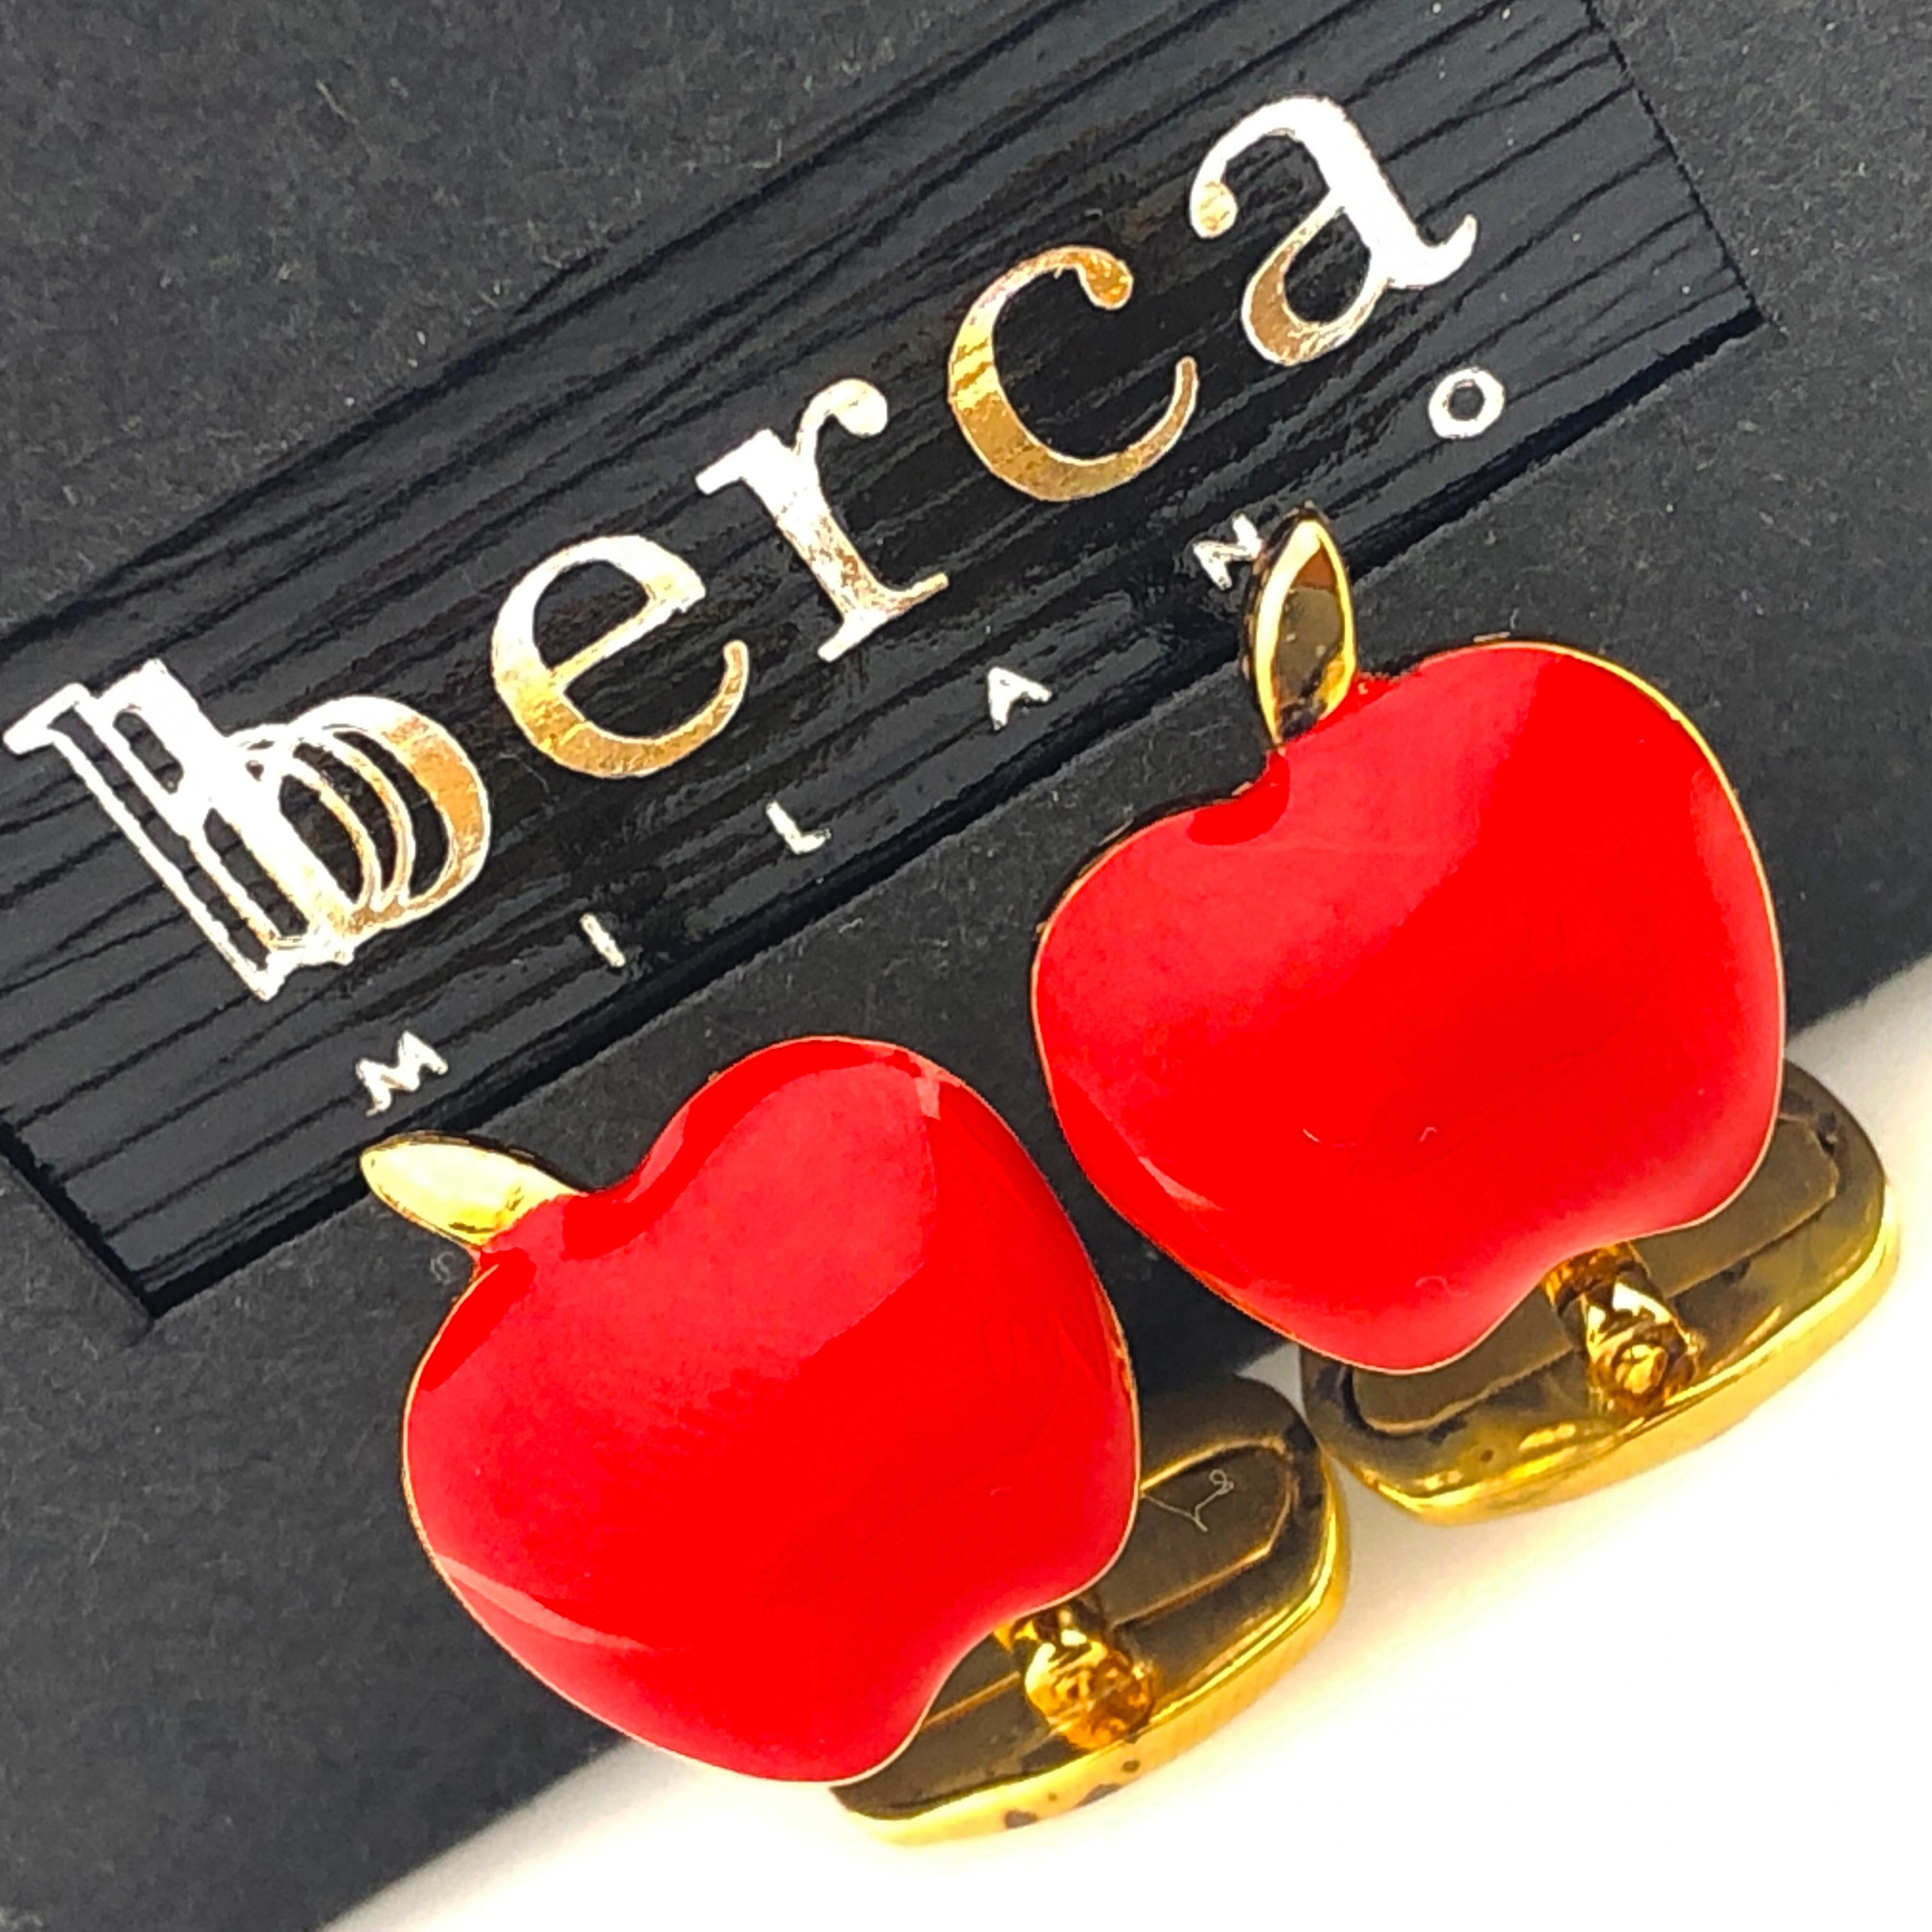 Unique and Chic Red Hand Enamelled Apple Shaped T-Bar Back, Sterling Silver Gold-Plated Cufflinks.
In our smart fitted black box.